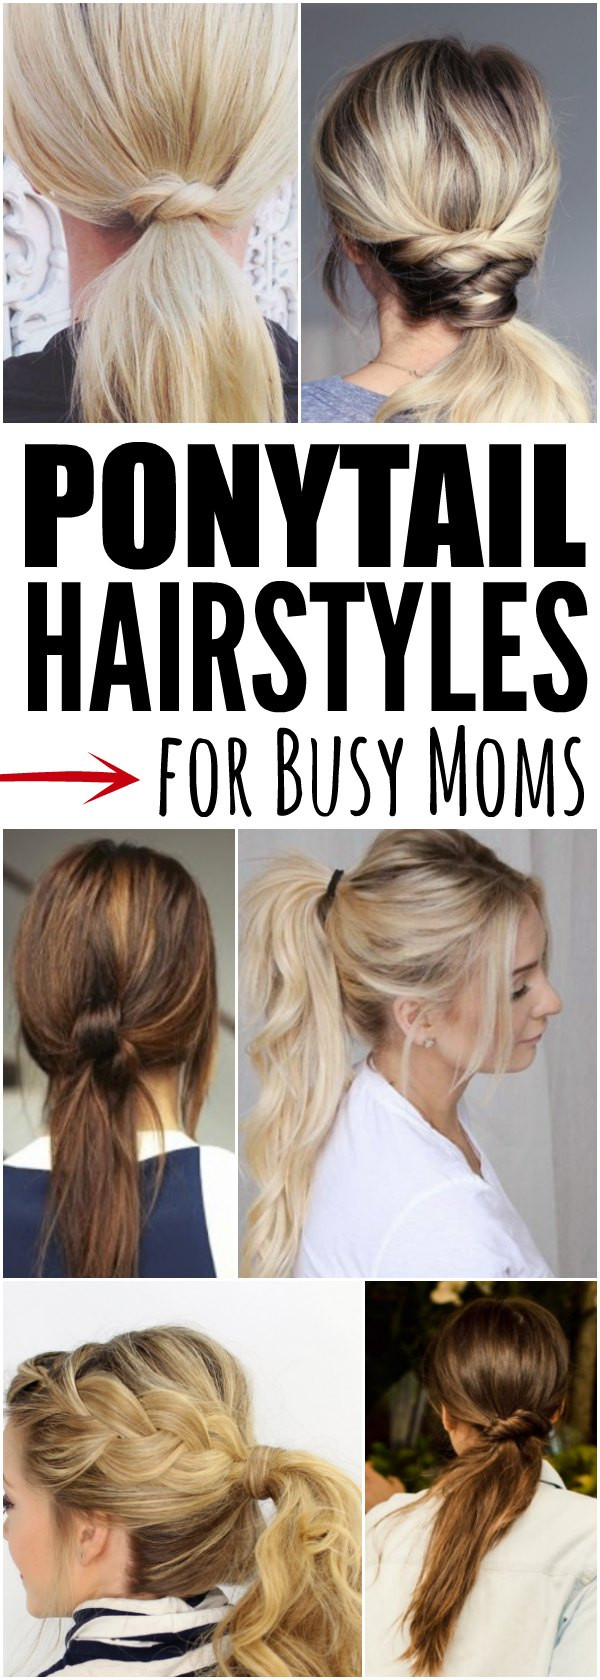 Easy Hairstyles For Moms
 Quick and Easy Ponytail Hairstyles for Busy Moms